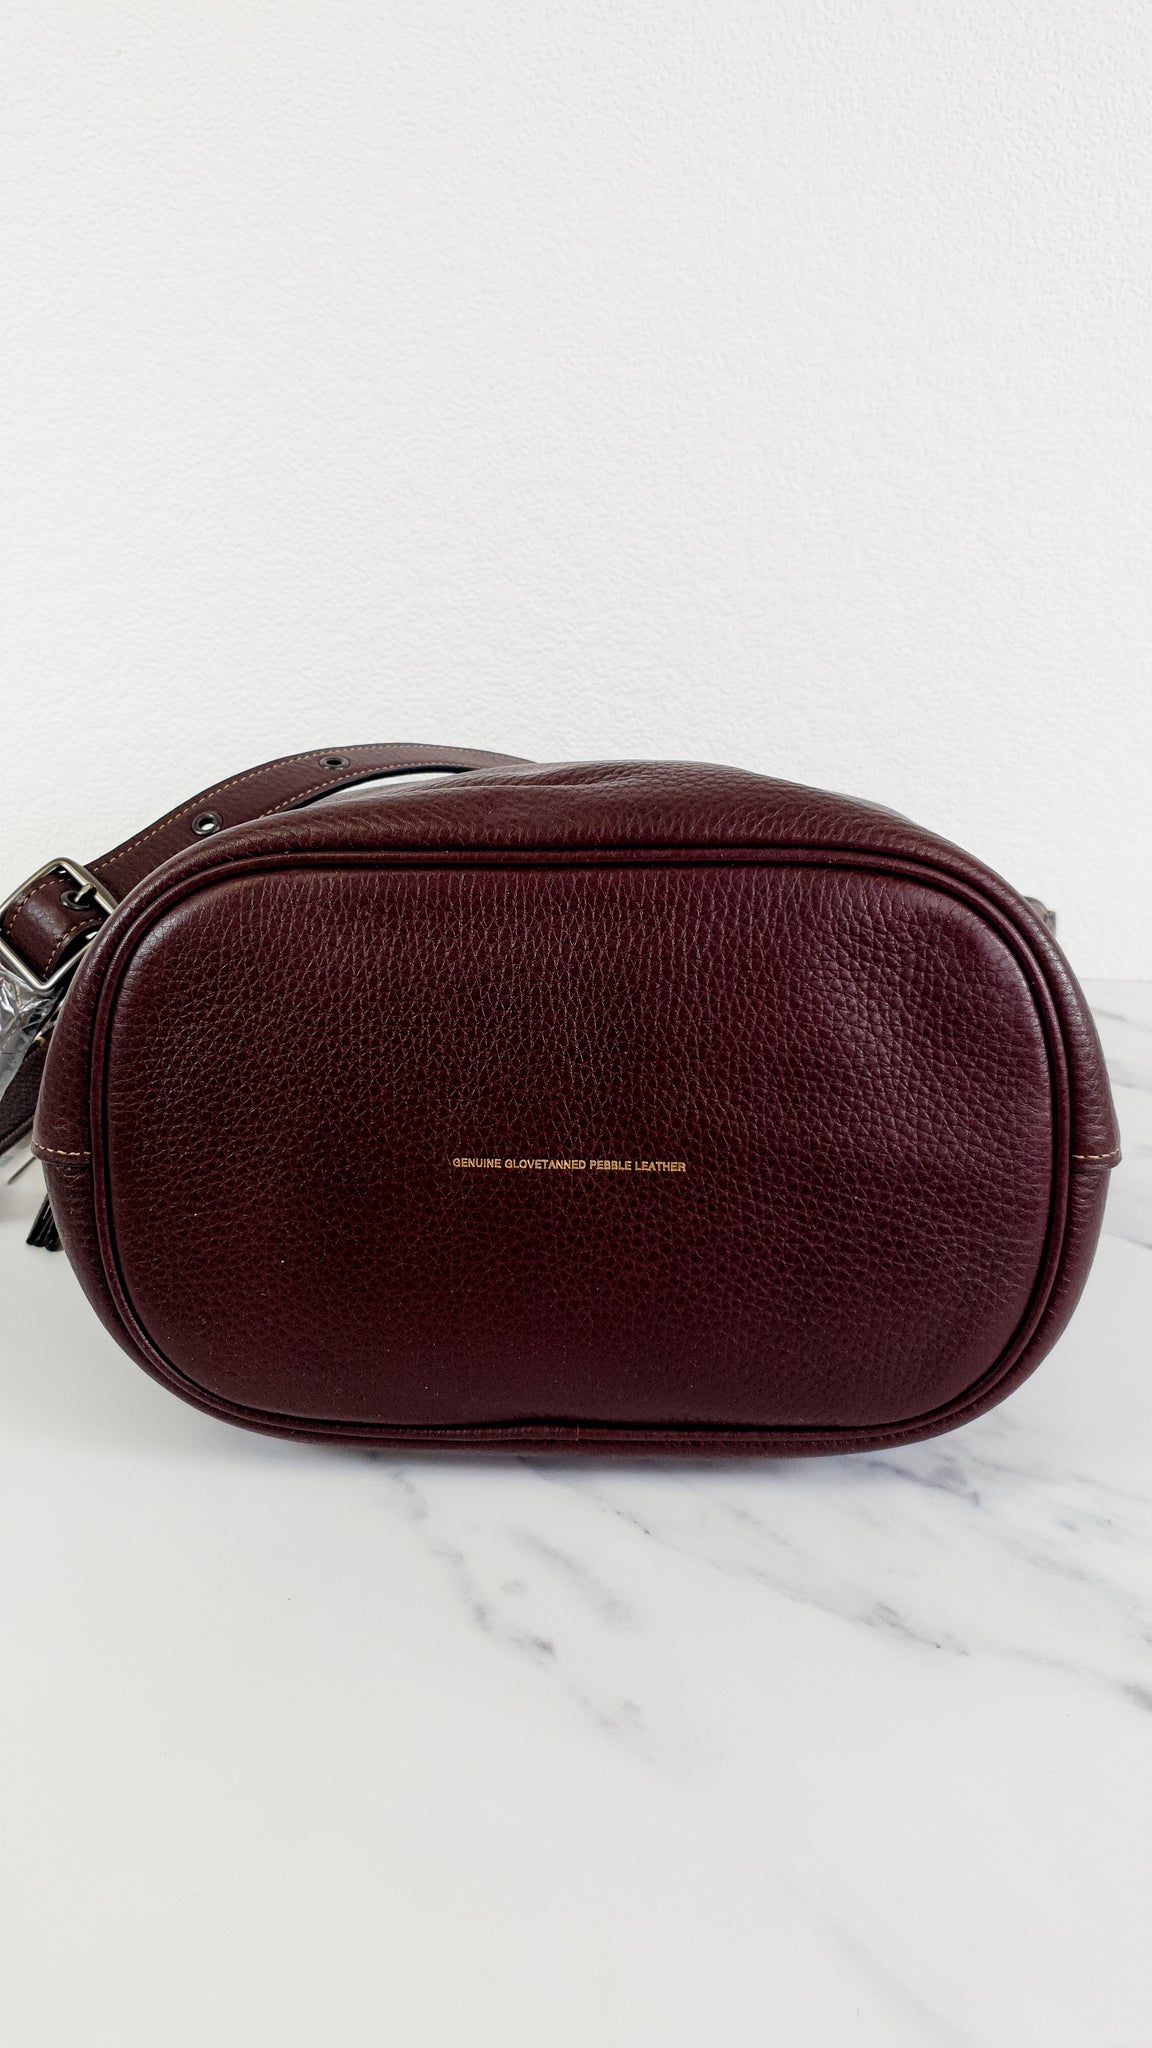 Coach 1941 Duffle Bag in Oxblood Brown Pebble Leather - Crossbody bag –  Essex Fashion House